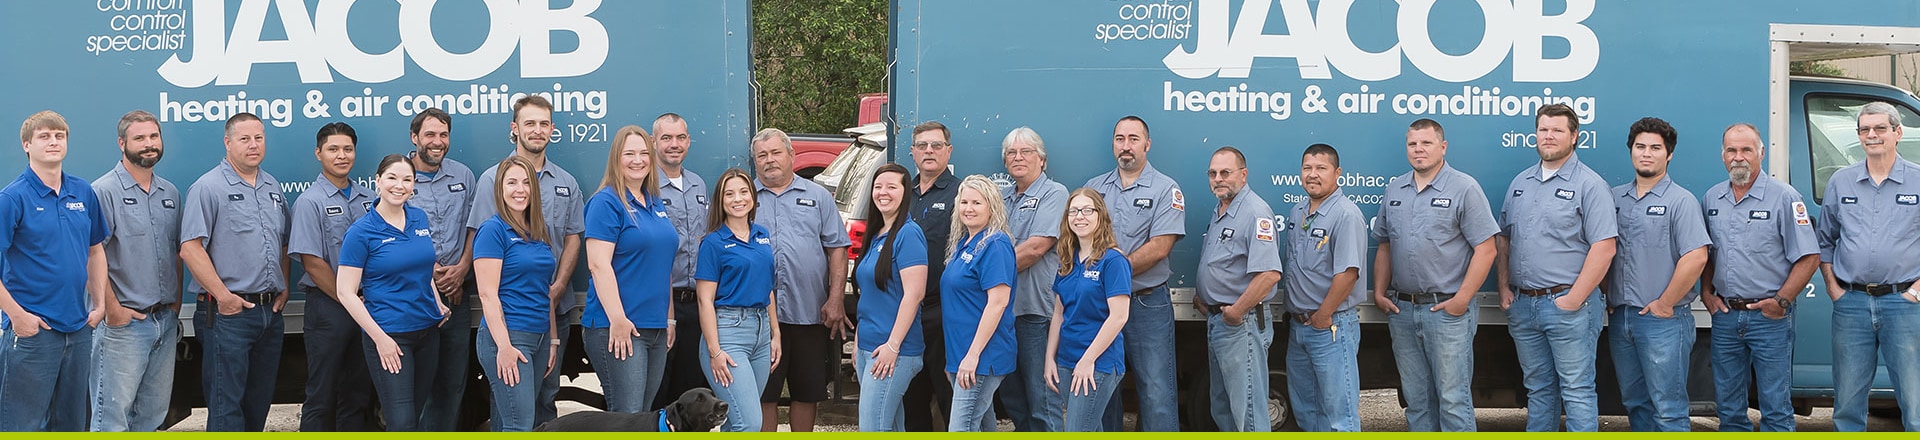 Full Jacob Heating & Air Conditioning team standing together in front of two large blue company trucks